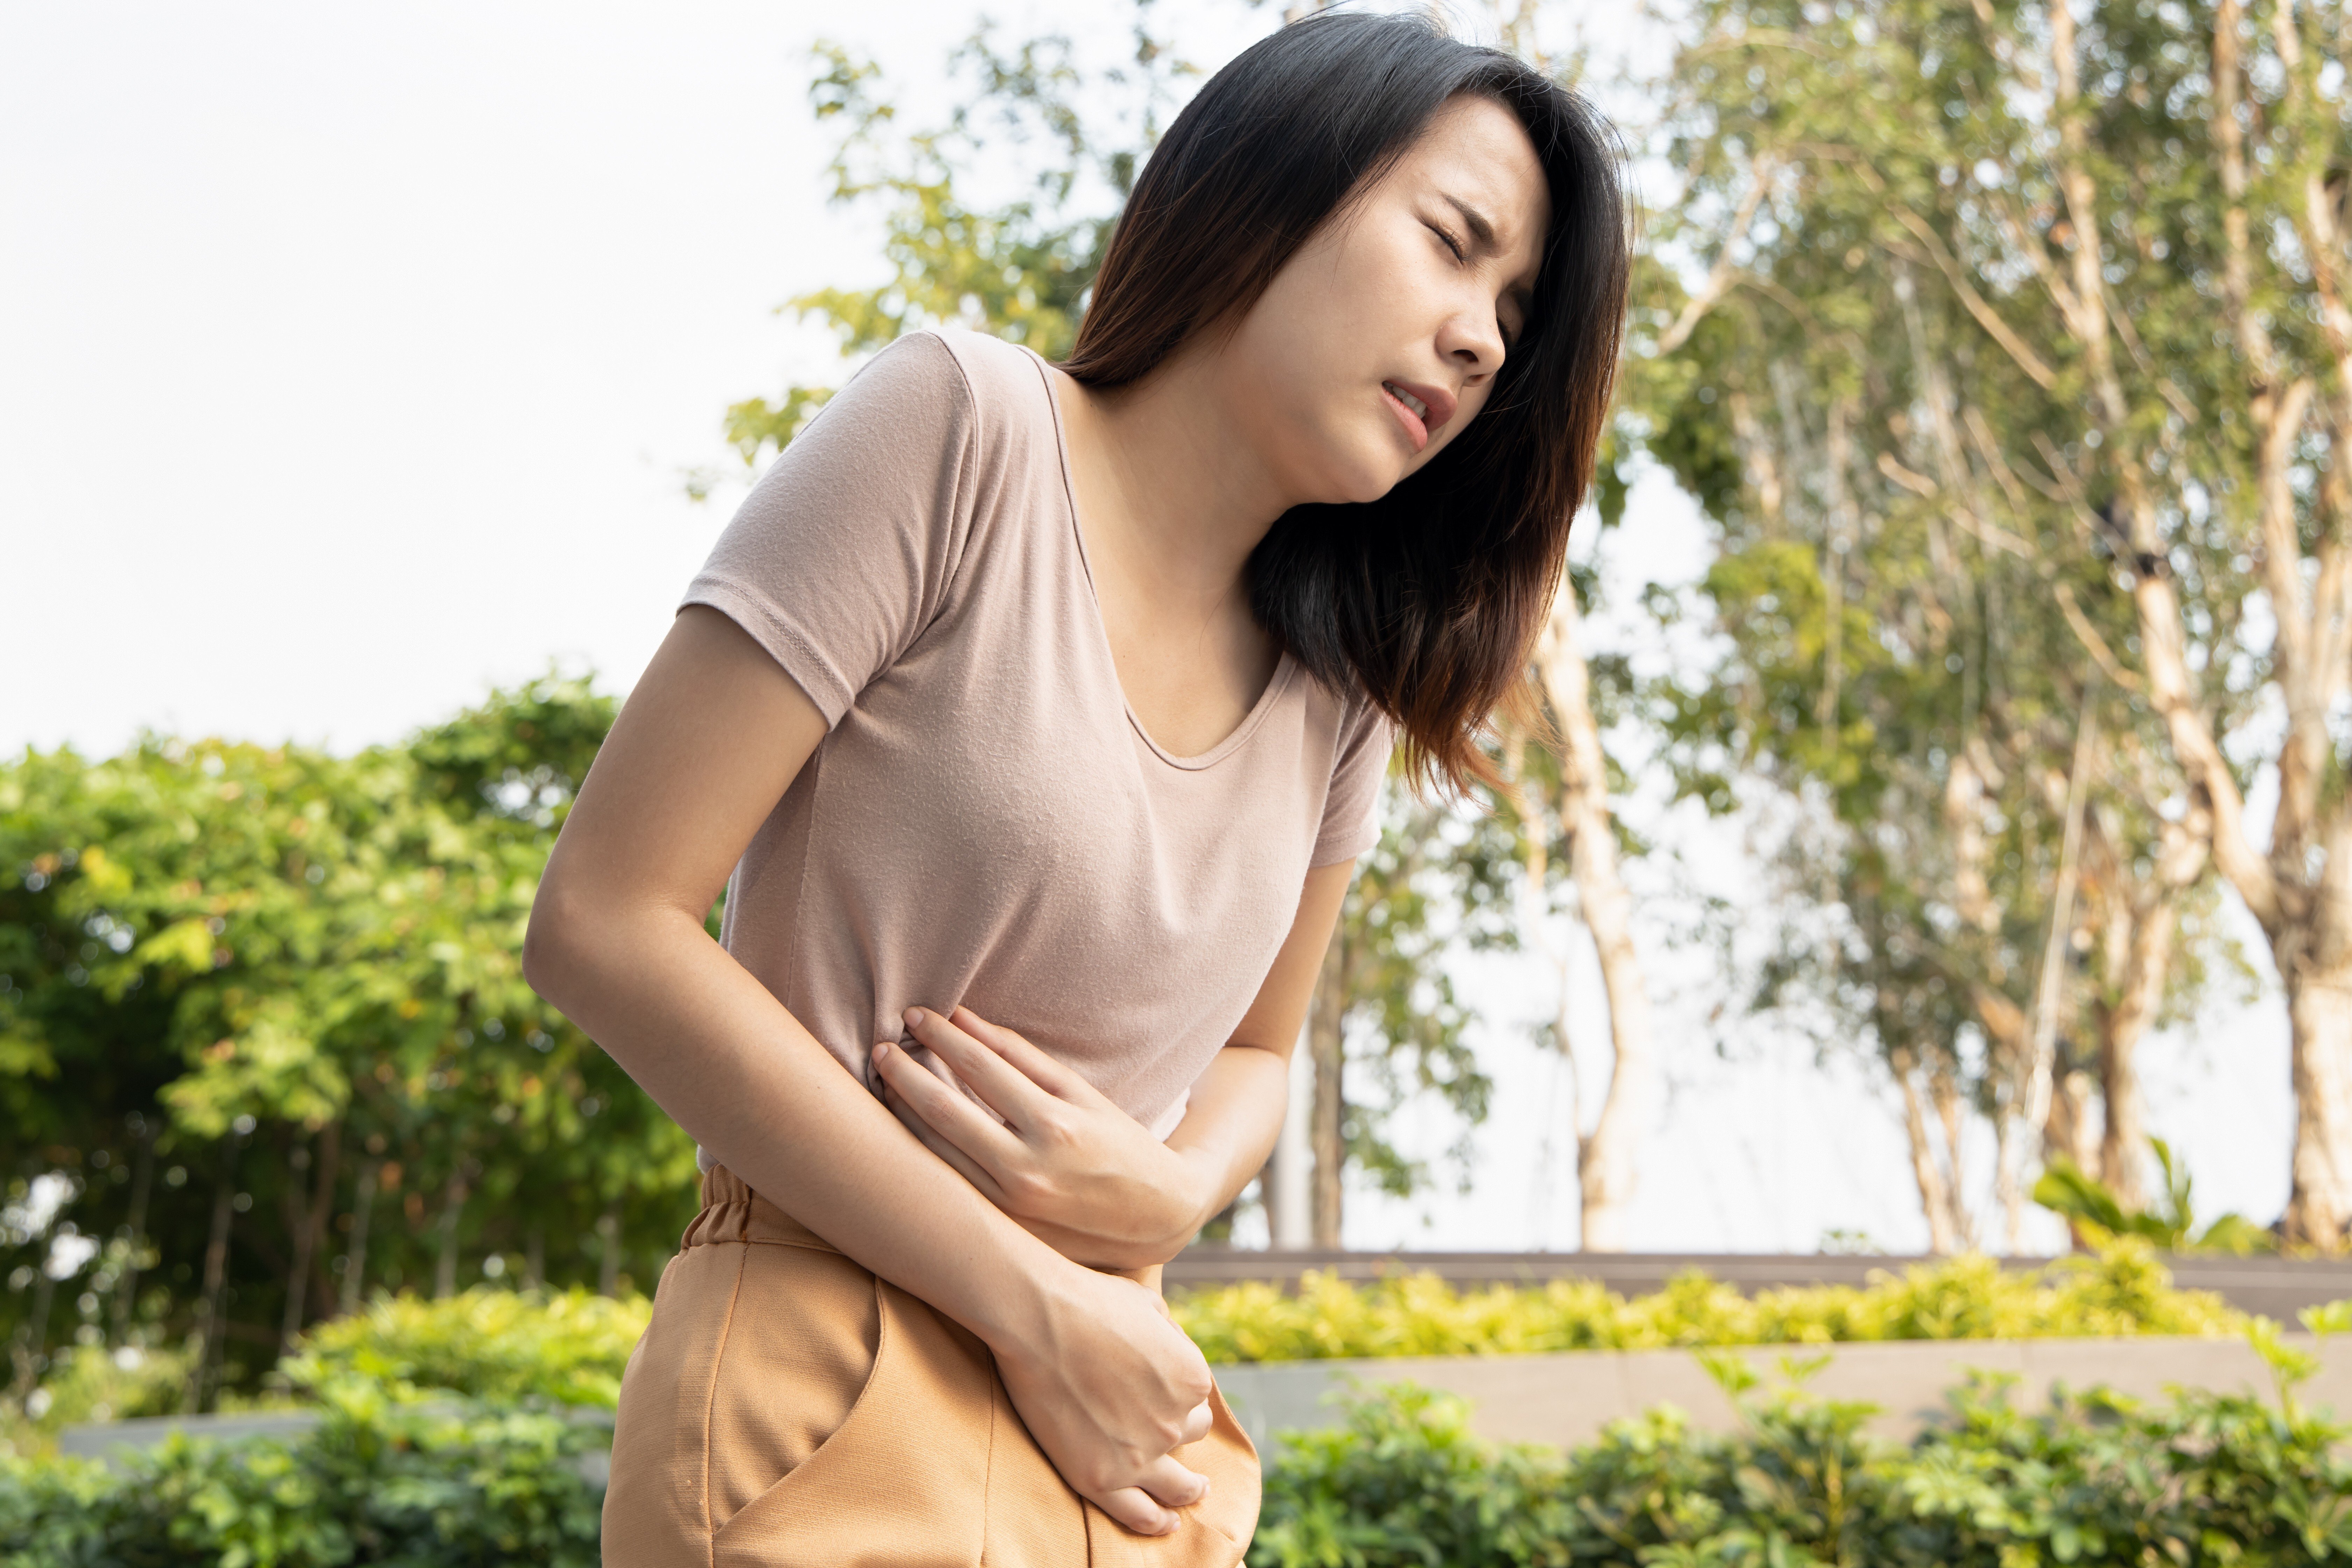 Women in Liaoning province in northern China are to be offered one or two days off a month for severe period cramps. Photo: Shutterstock